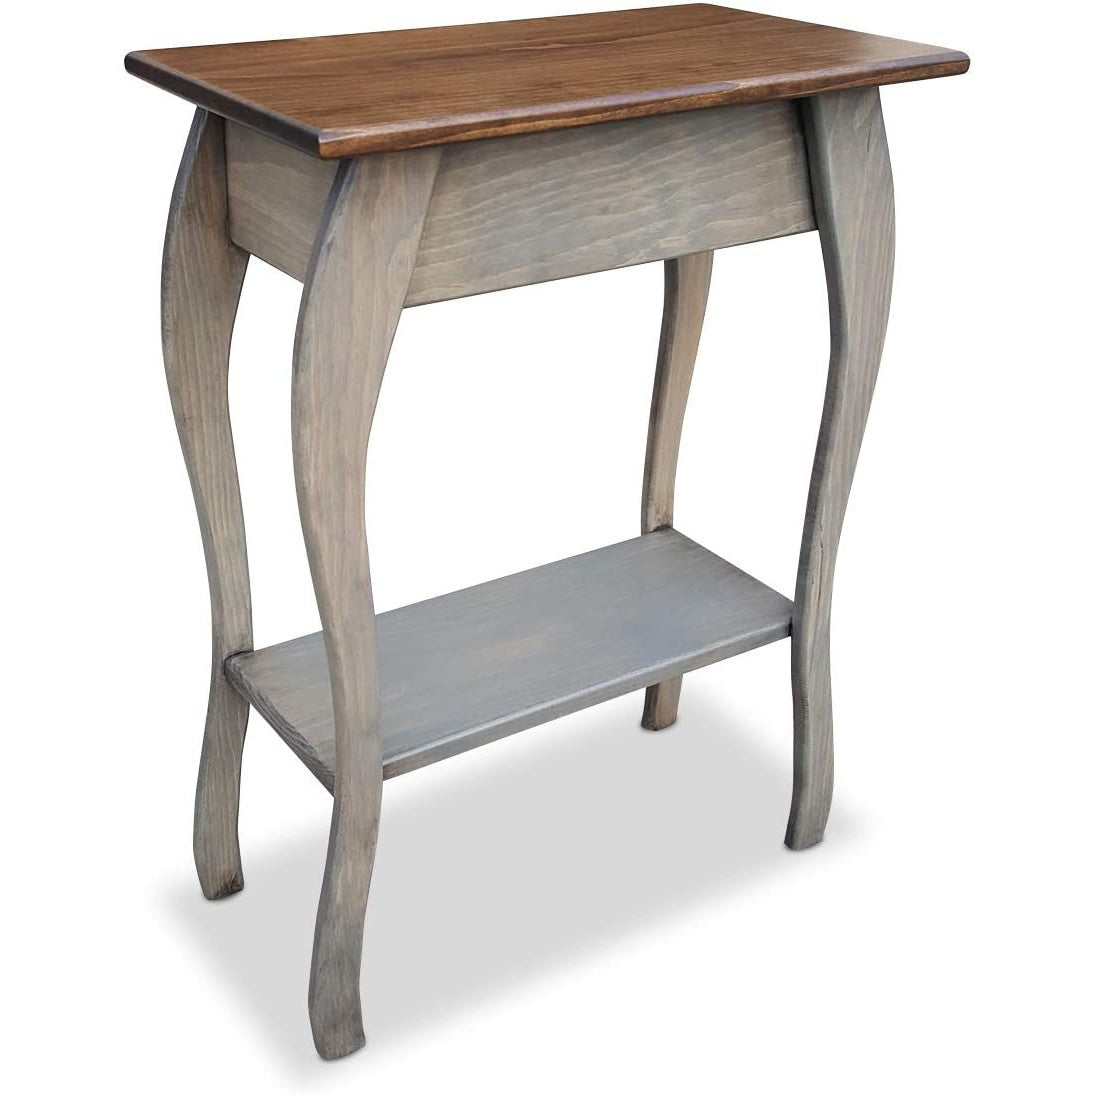 Slim Wooden End Table Amish Furniture